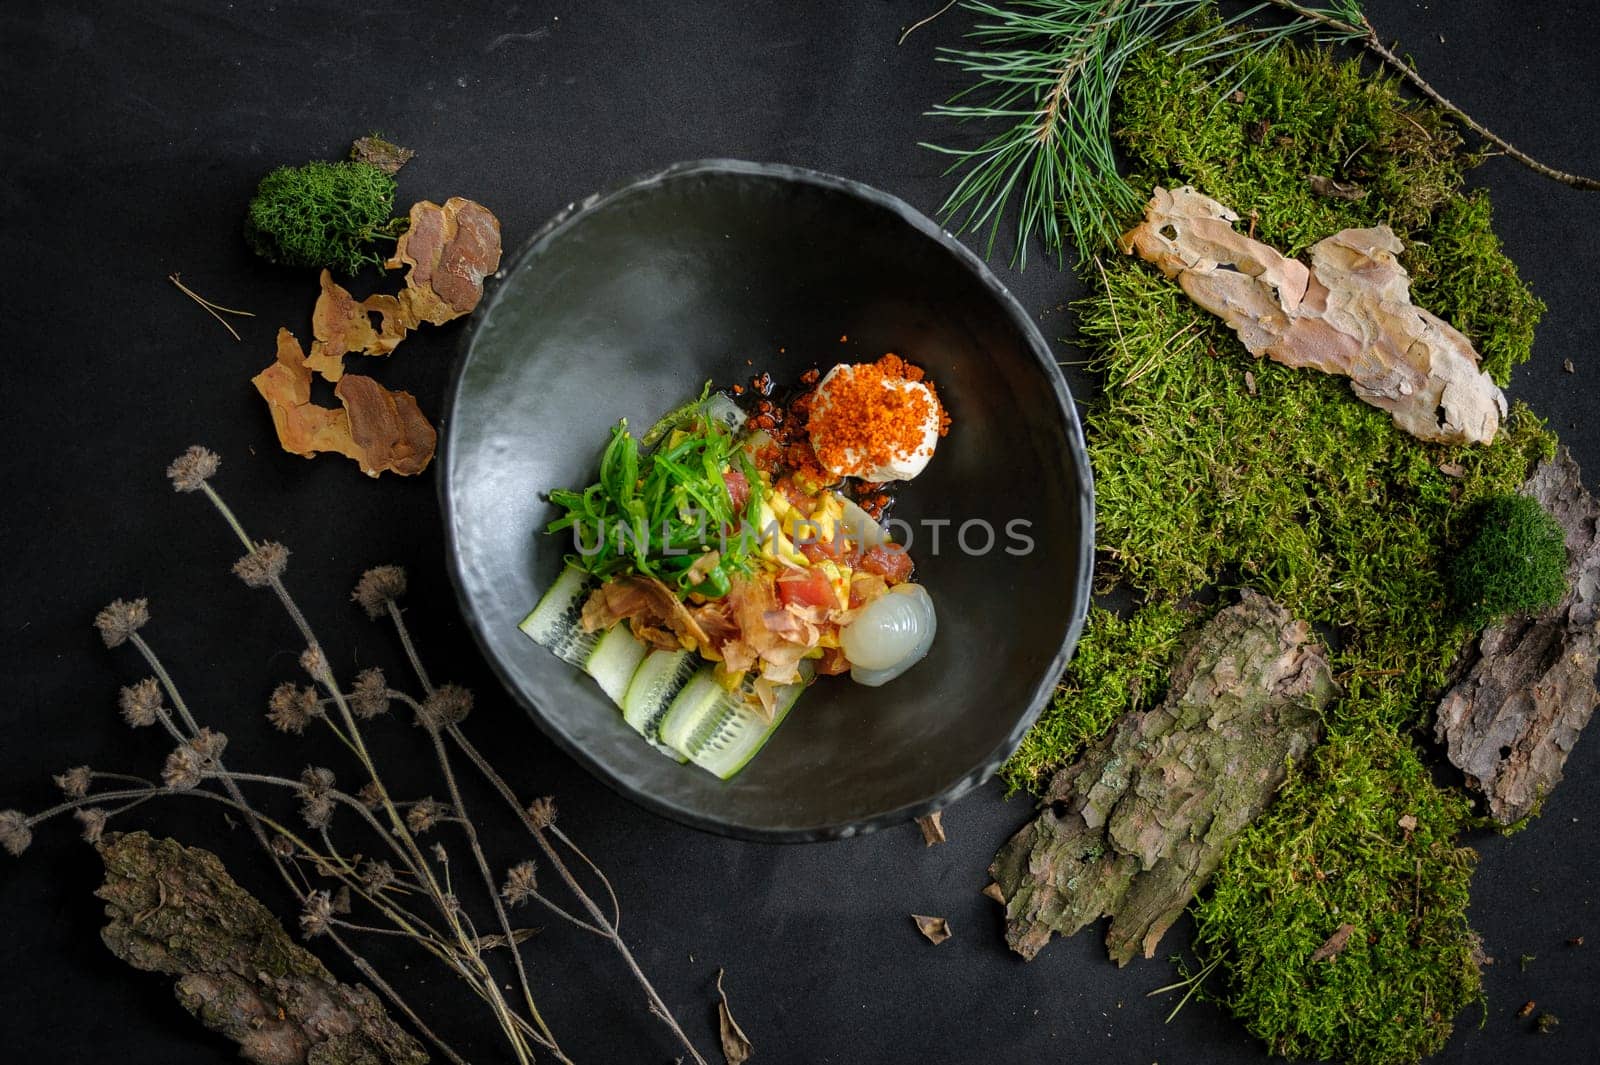 Salad with scallop, wakame, tuna flakes and avocado on a dark background